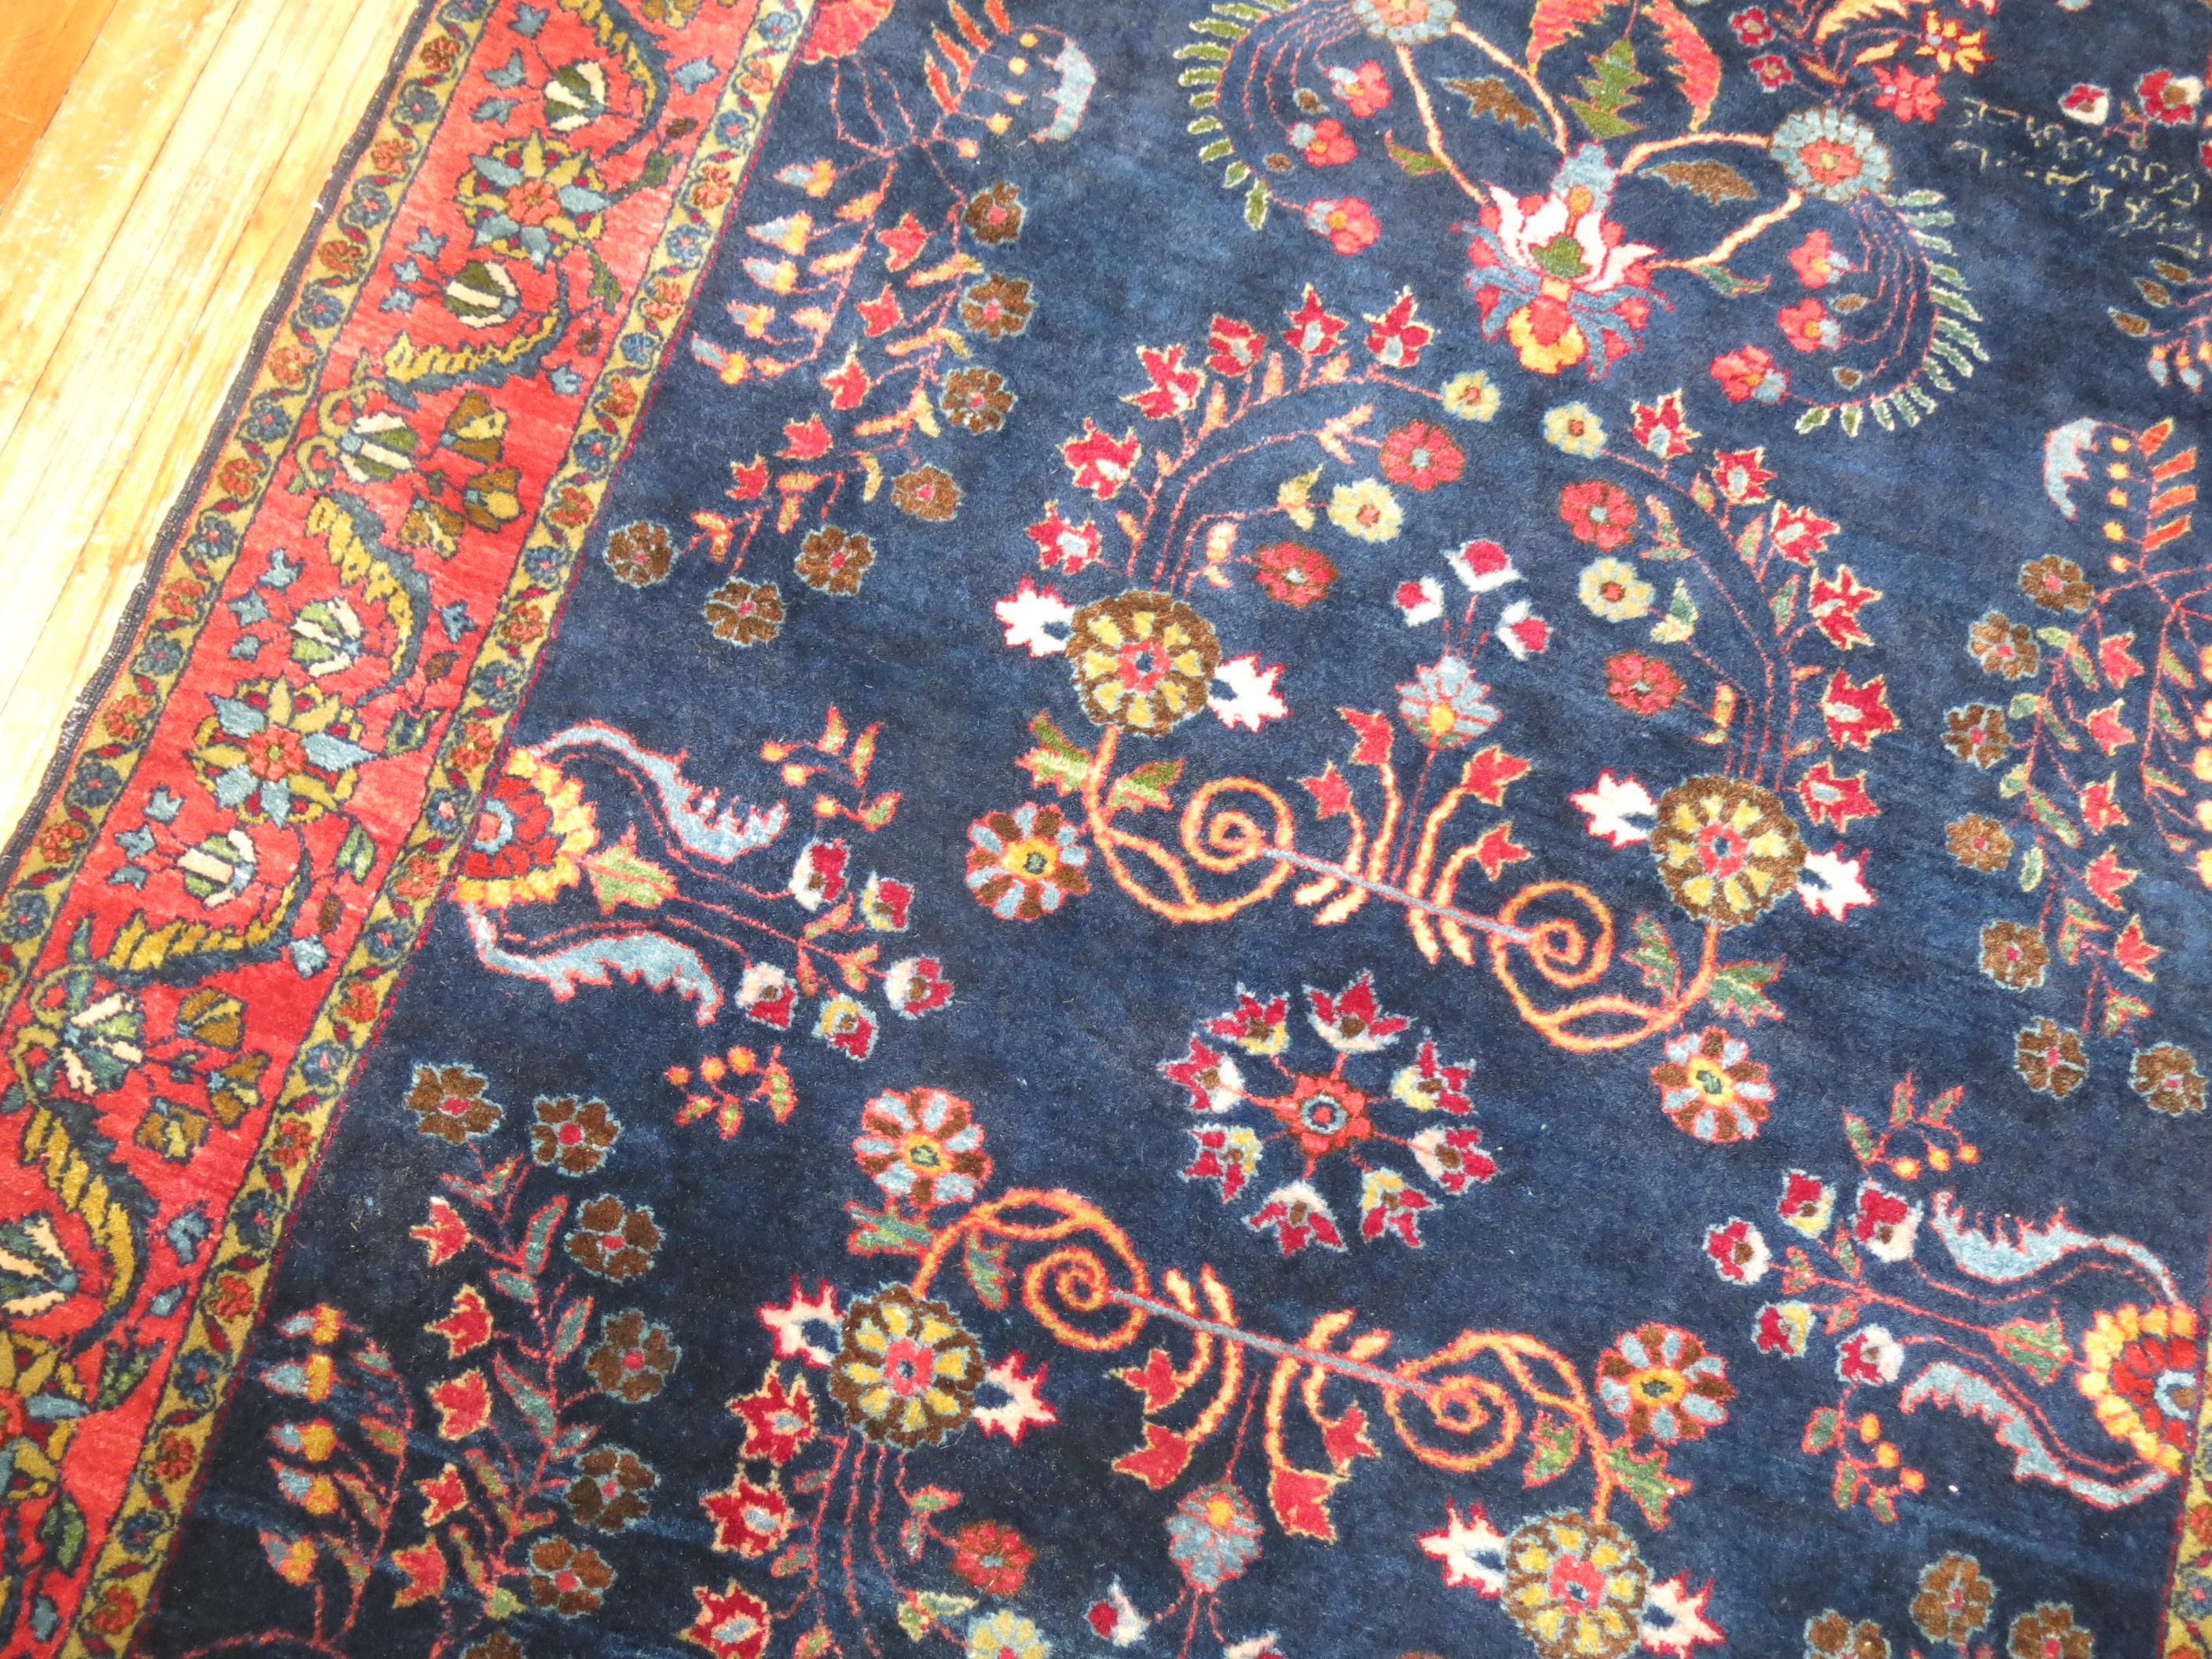 Stunning early 20th century Persian Sarouk rug.

Before the 1920s the Sarouk design was the most popular of Persian rugs worldwide. Most of them consist of deep red fields with navy borders. Rarely are they found in inverse colors like this